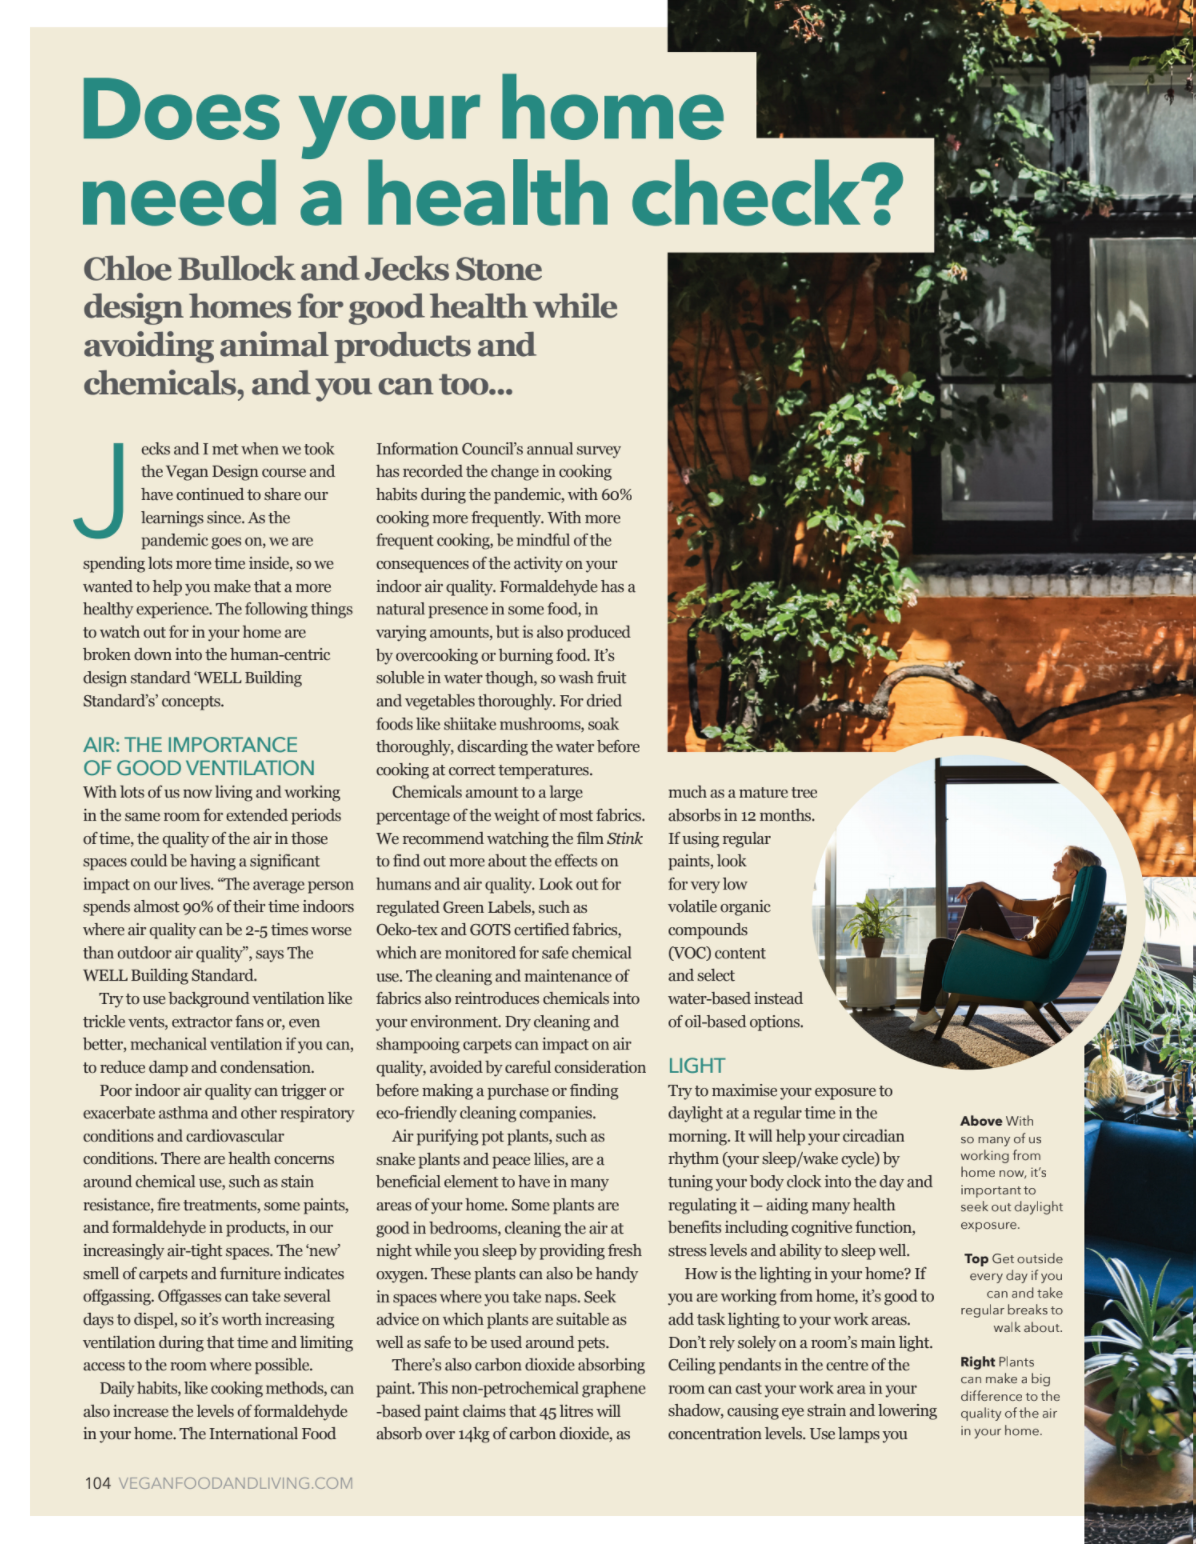 Does your home need a health check? Vegan Food & Living magazine - February 2021